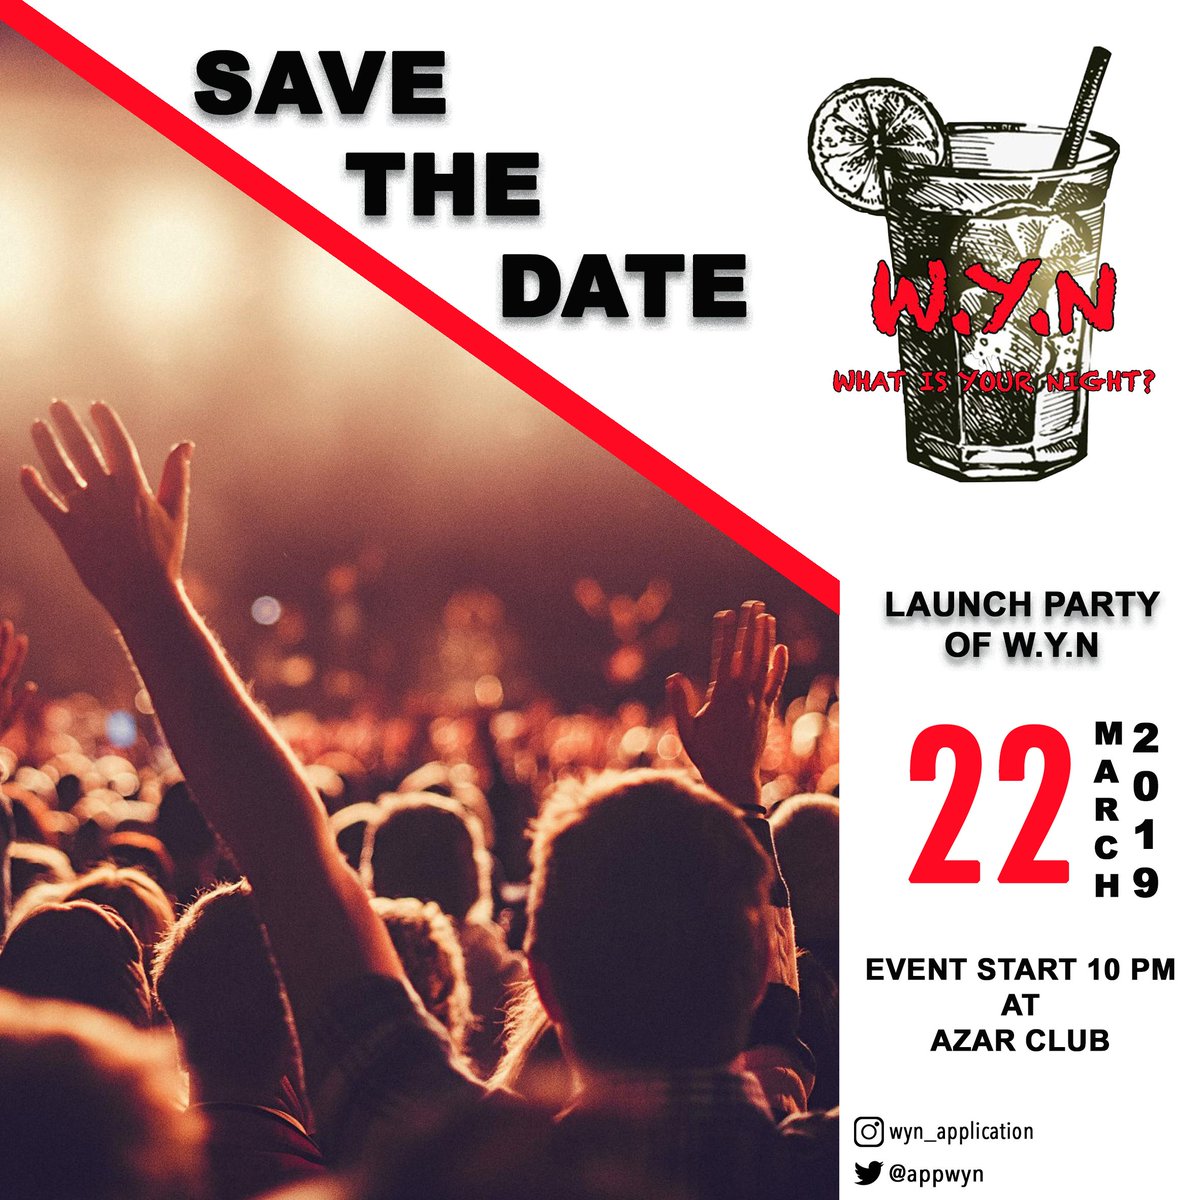 Come celebrate with us on March 22nd for the launch of our application #WYN #application #evening #azarclub